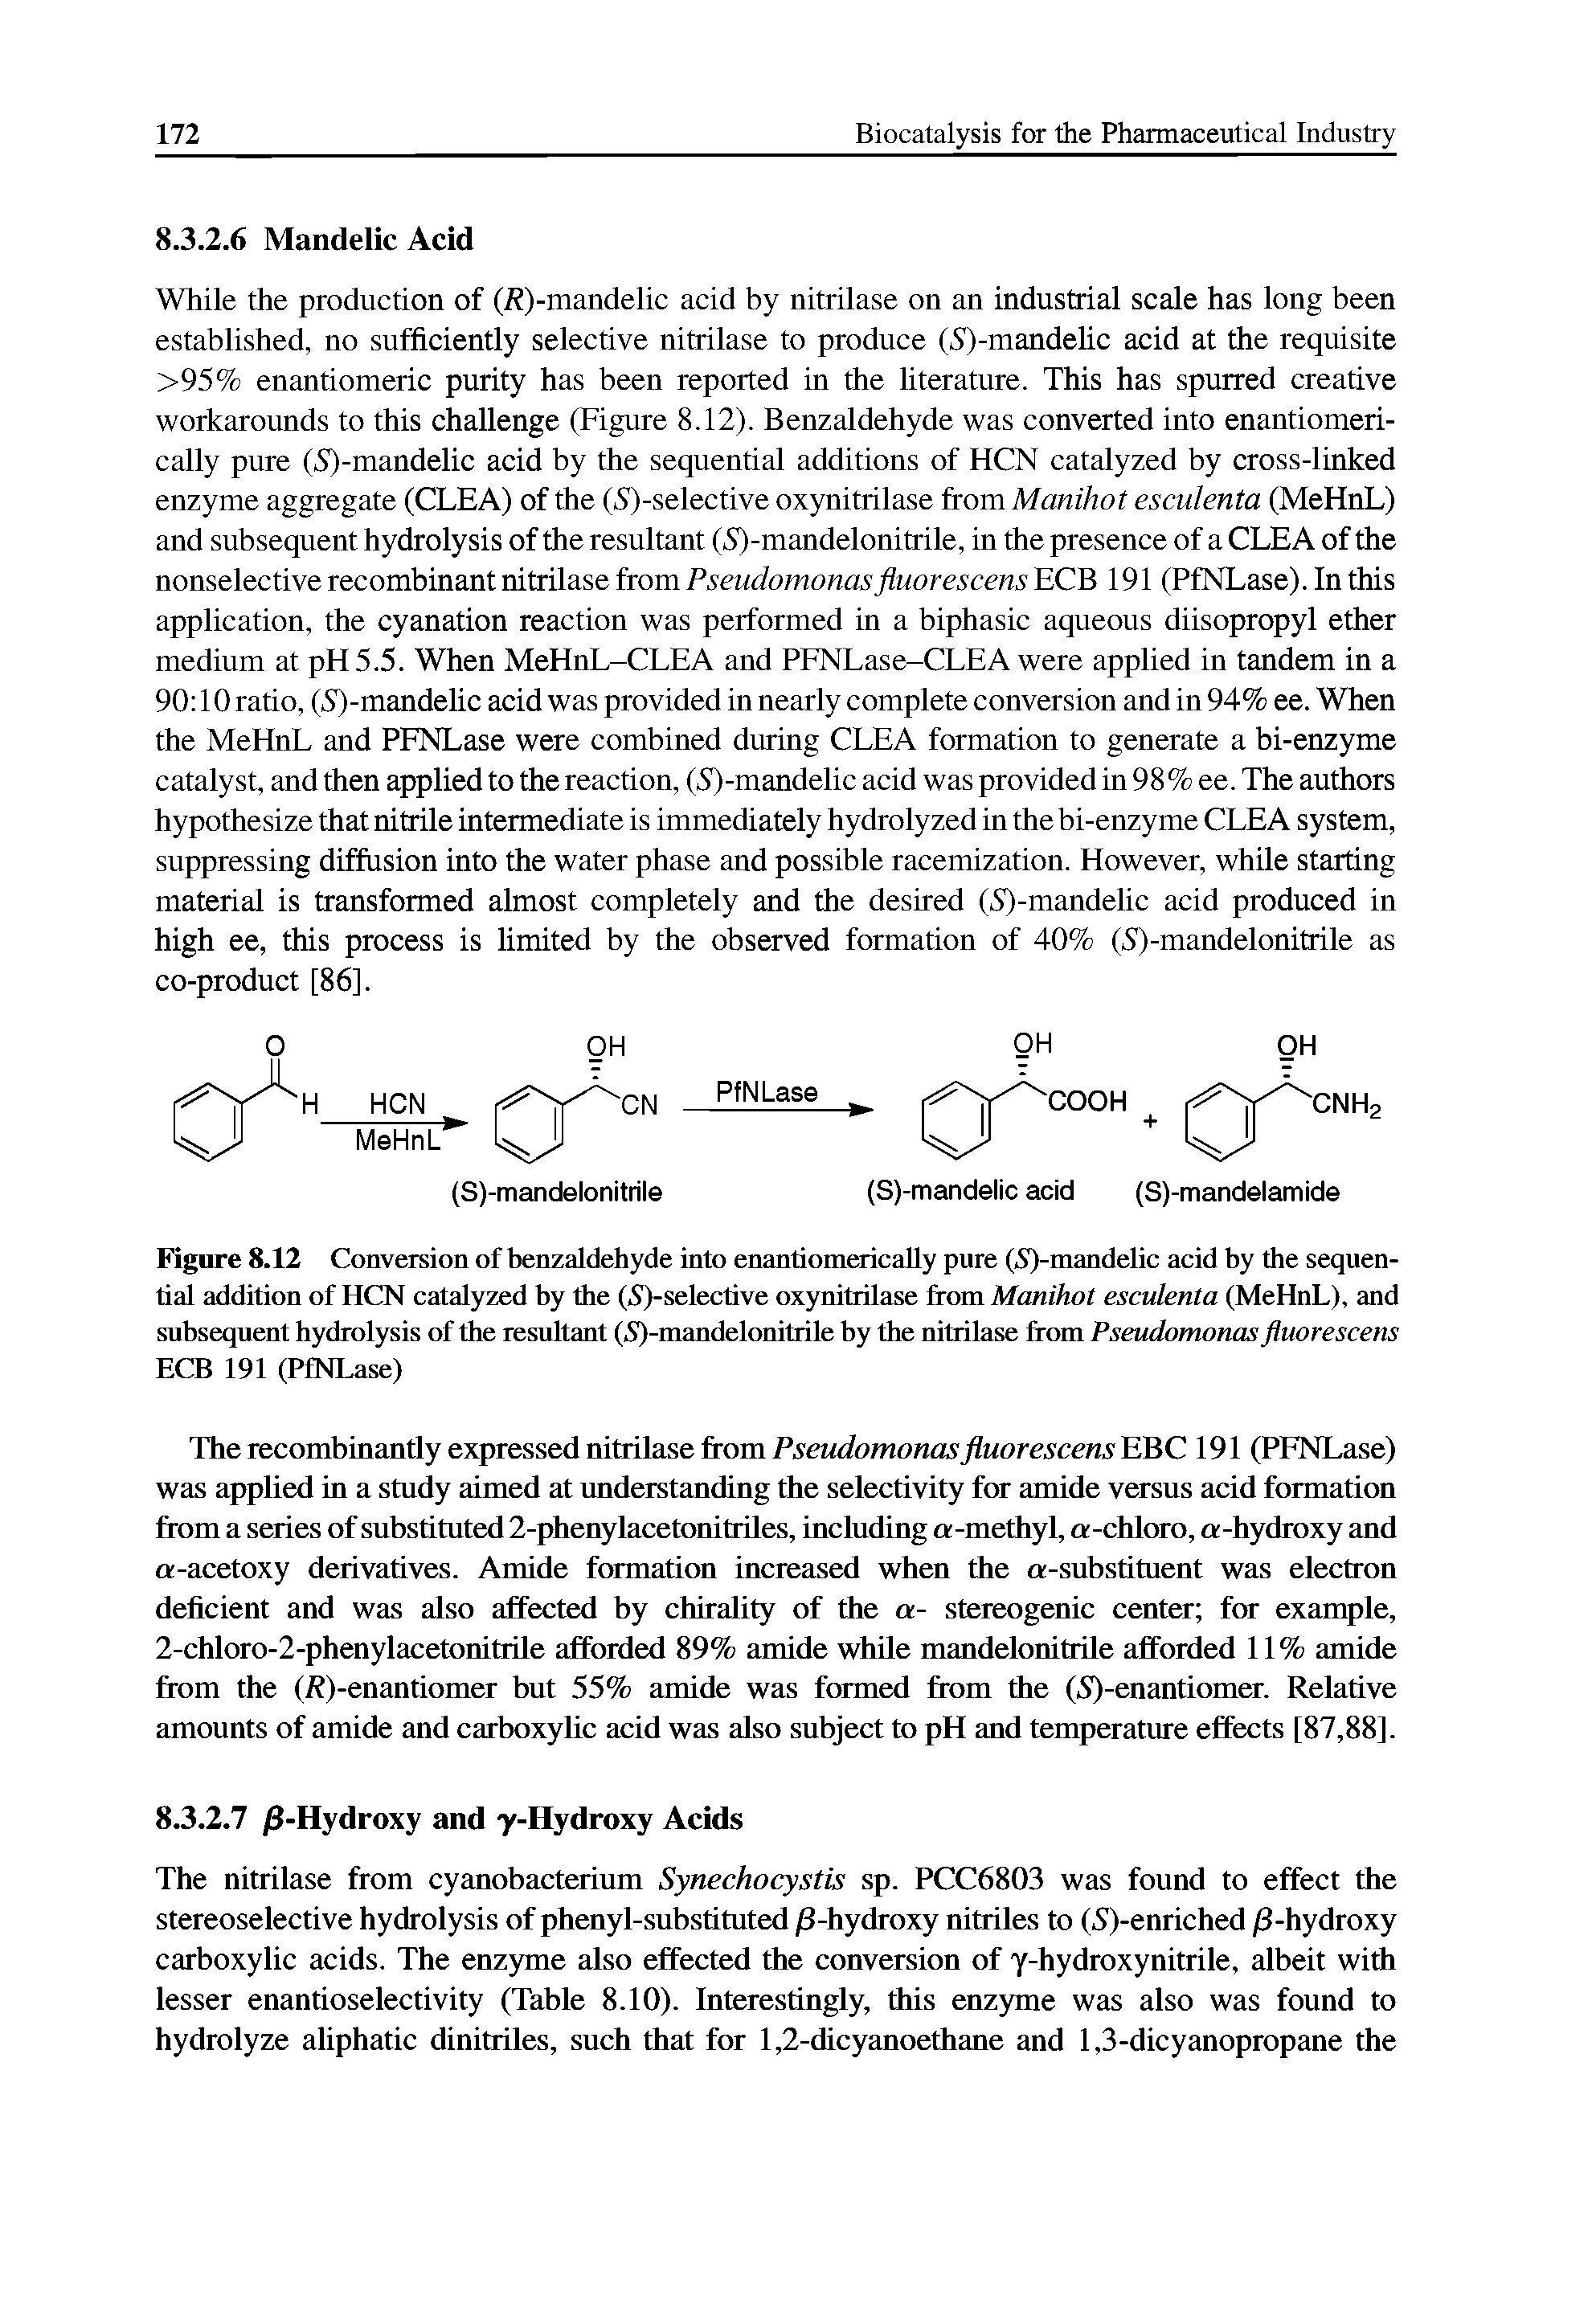 Figure 8.12 Conversion of benzaldehyde into enantiomerically pure (S)-mandelic acid by the sequential addition of HCN catalyzed by the (.S )-selective oxynitrilase from Manihot esculenta (MeHnL), and subsequent hydrolysis of the resultant (5)-mandelonitrile by the nitrilase from Pseudomonas fluorescens ECB 191 (PfNLase)...